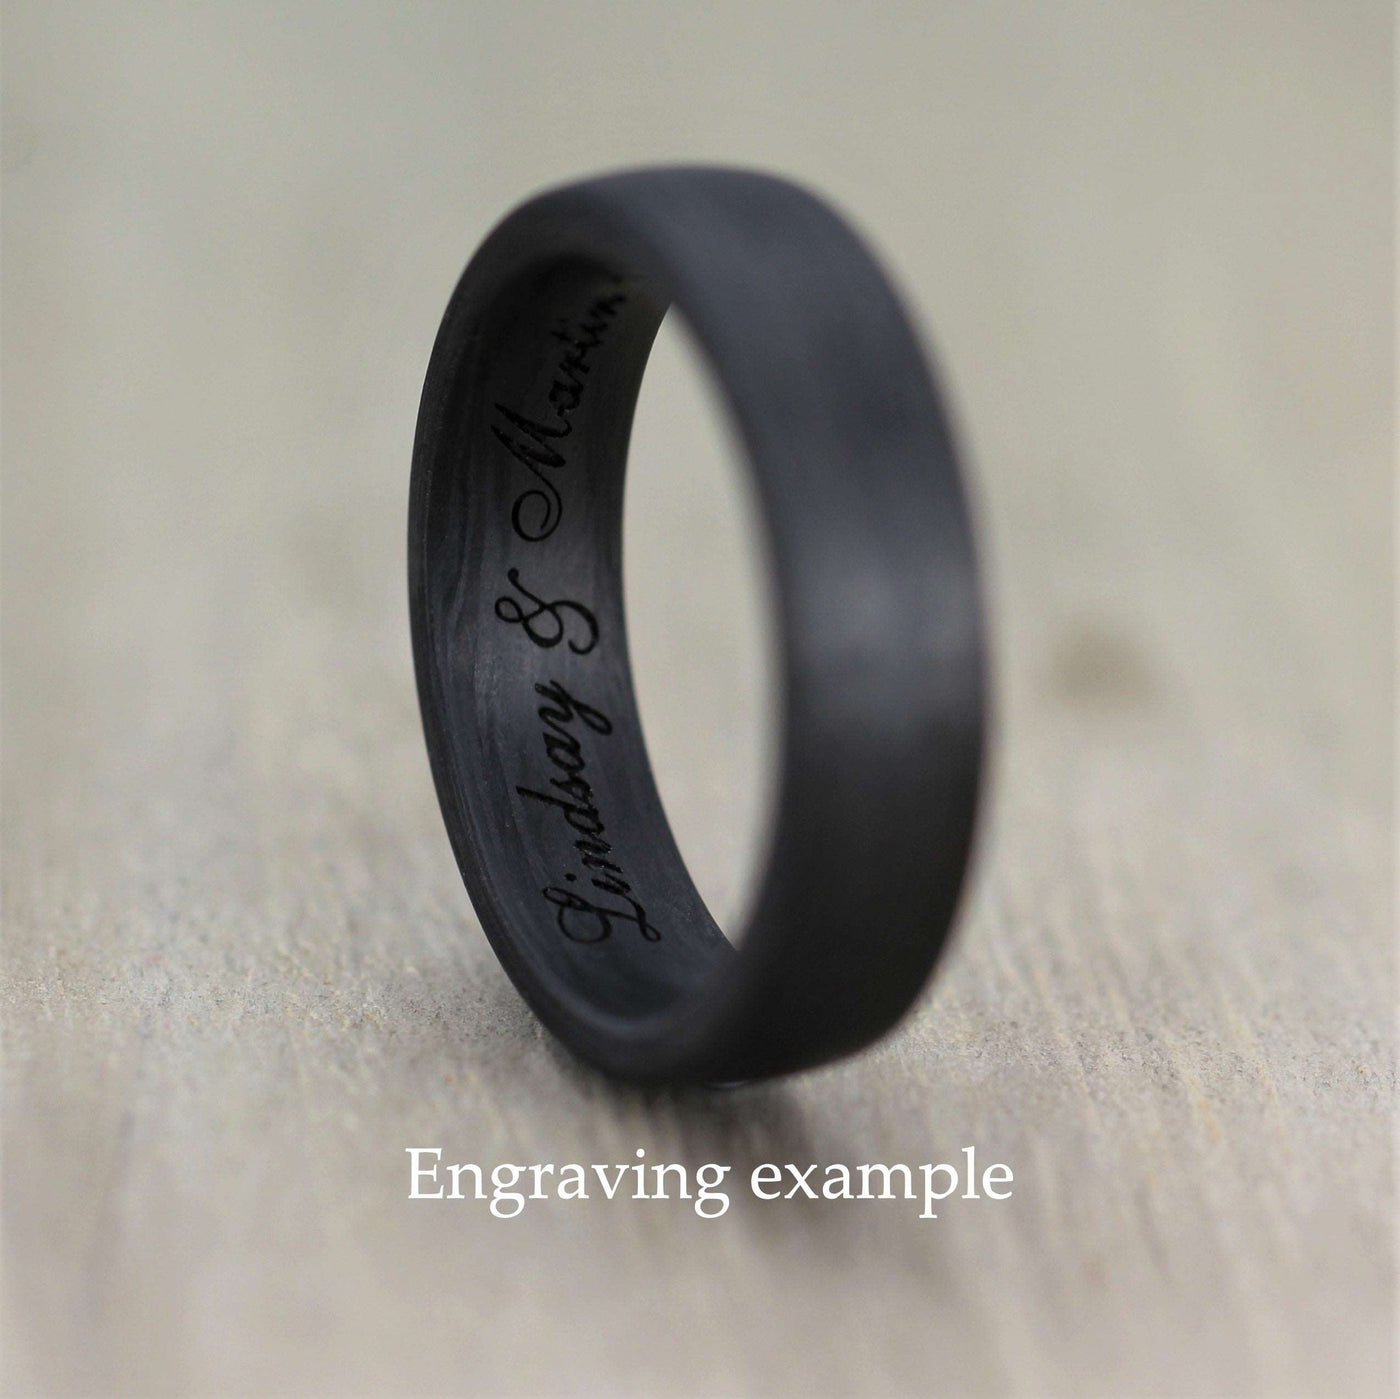 Flat Court, Carbon Fibre Wedding Ring, 7 to 9mm